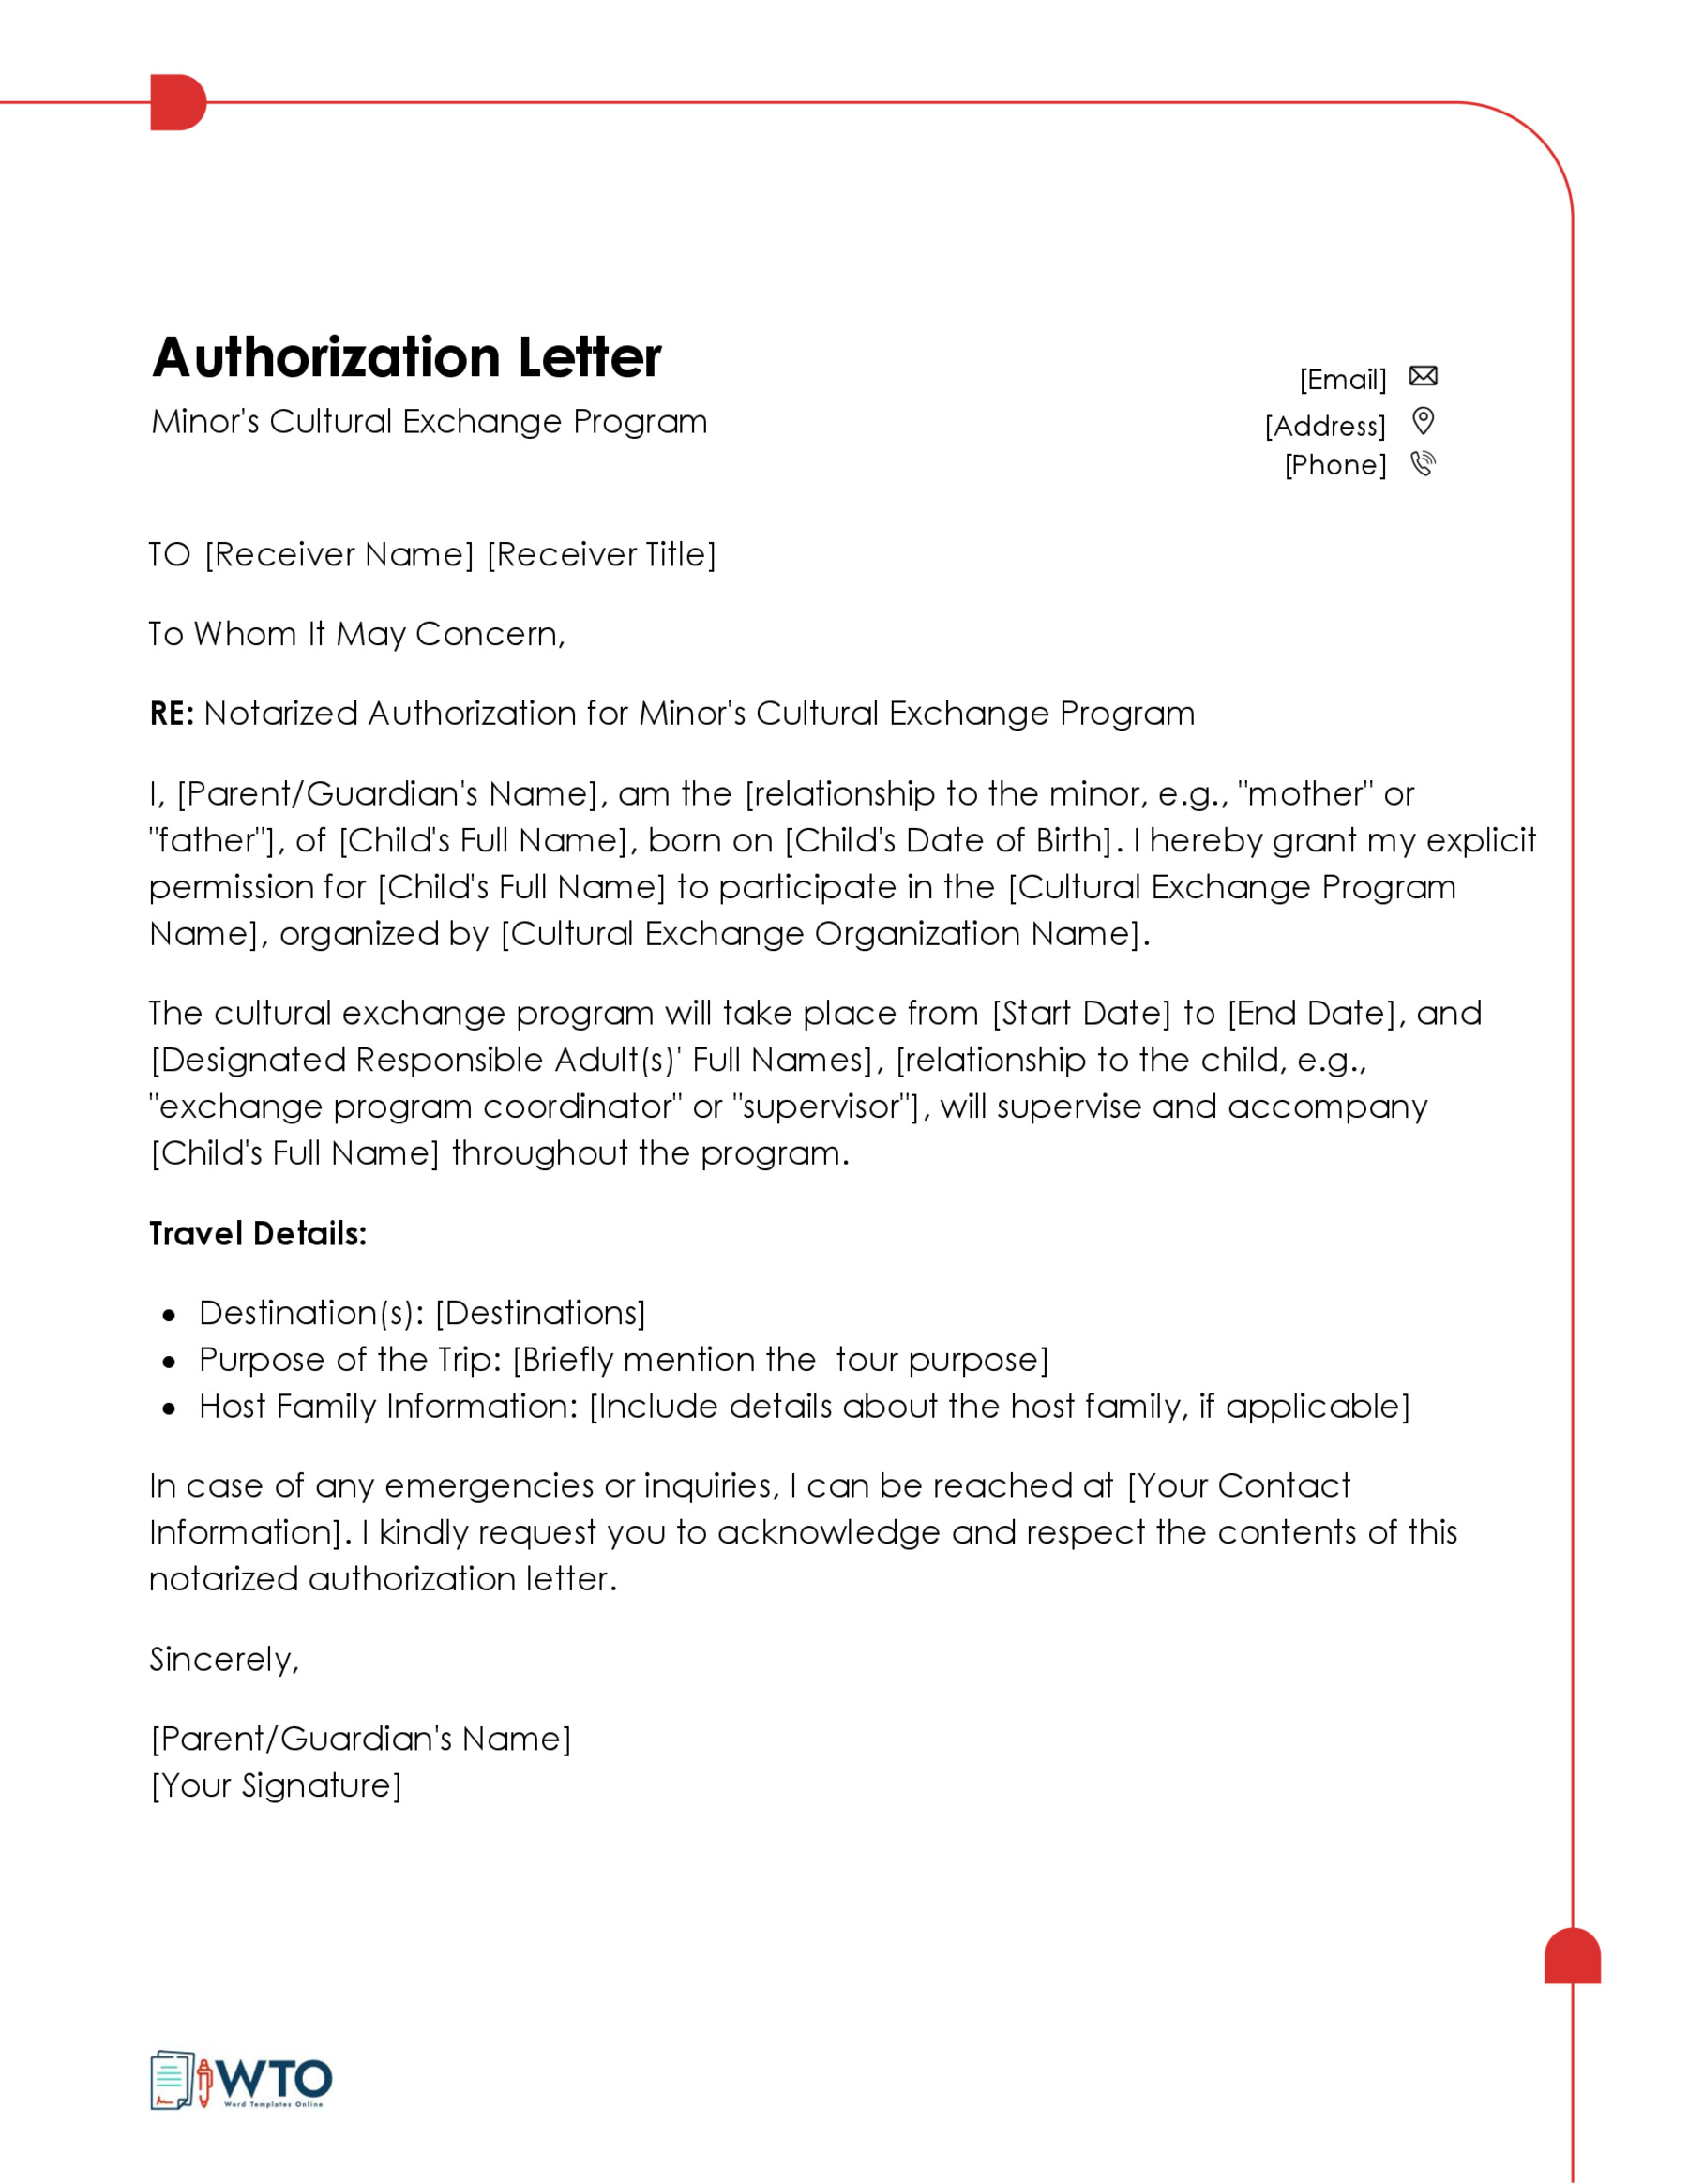 Authorization Letter toTravel with Minor Template-Downloadable word format